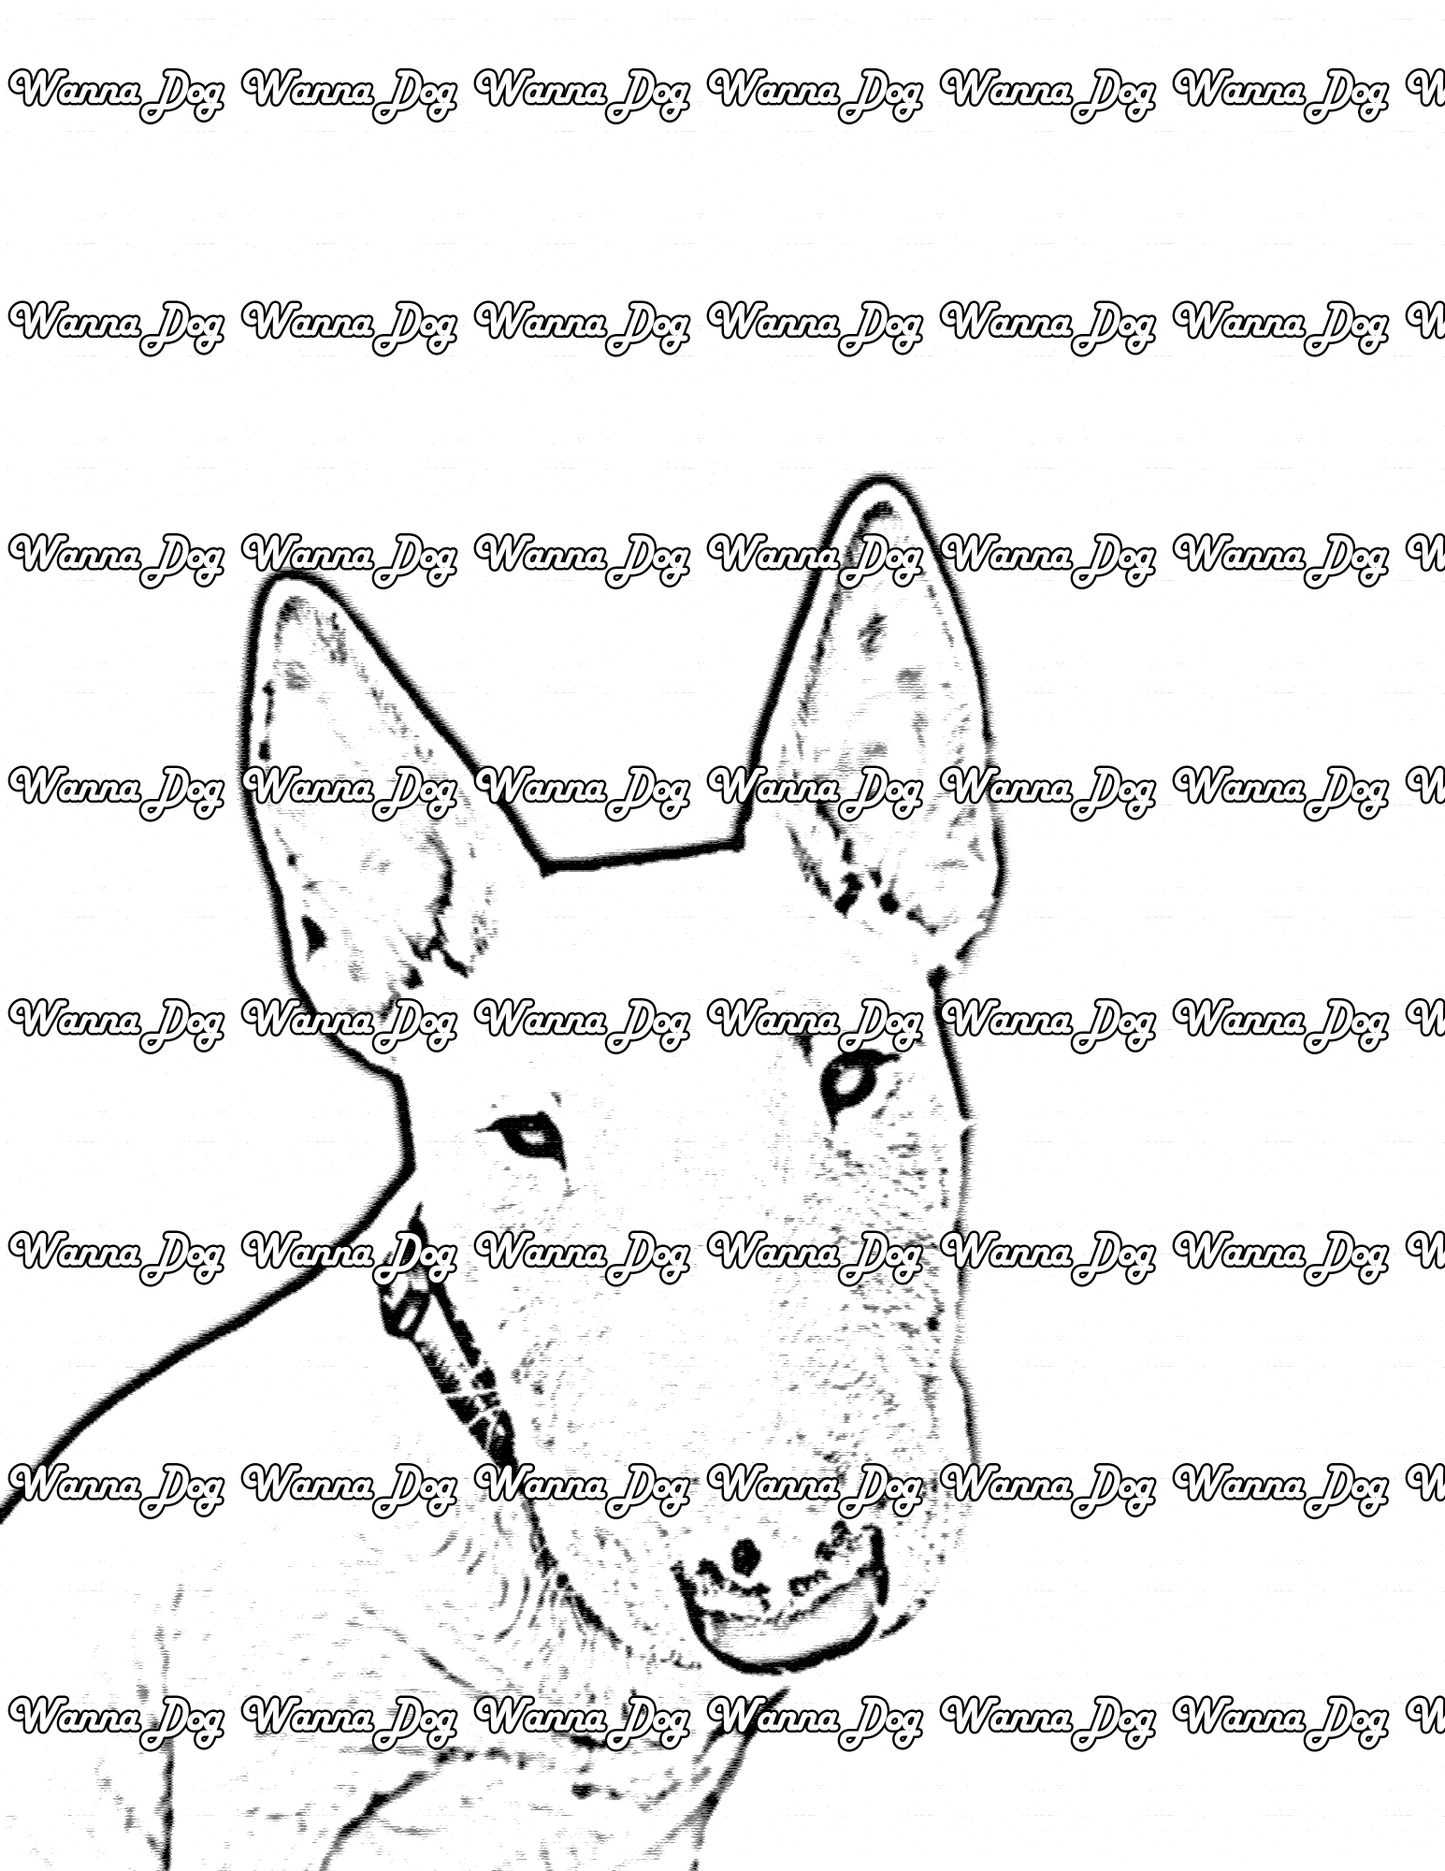 Bull Terrier Coloring Page of a Bull Terrier with ears up